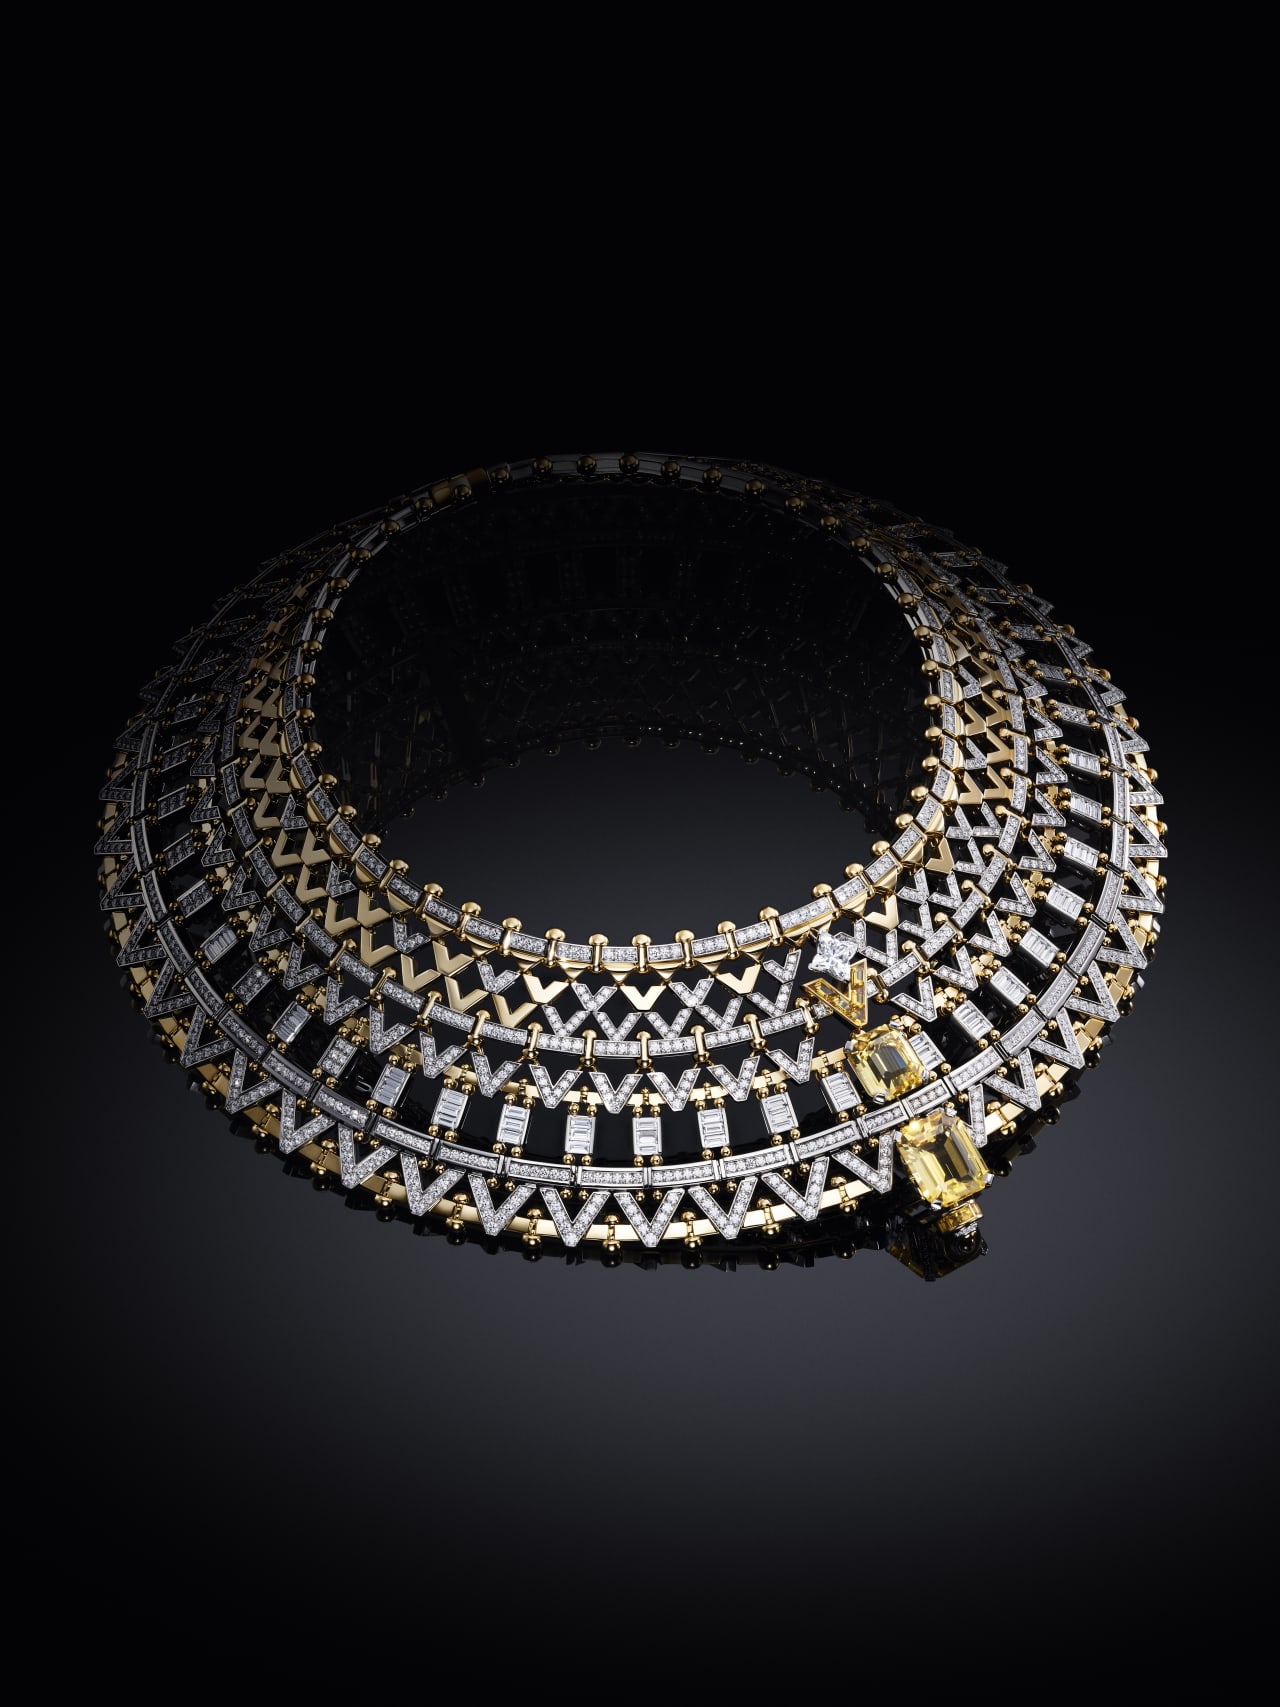 Louis Vuitton’s passion for travel is explored in the Vision necklace,
Courtesy of Louis Vuitton